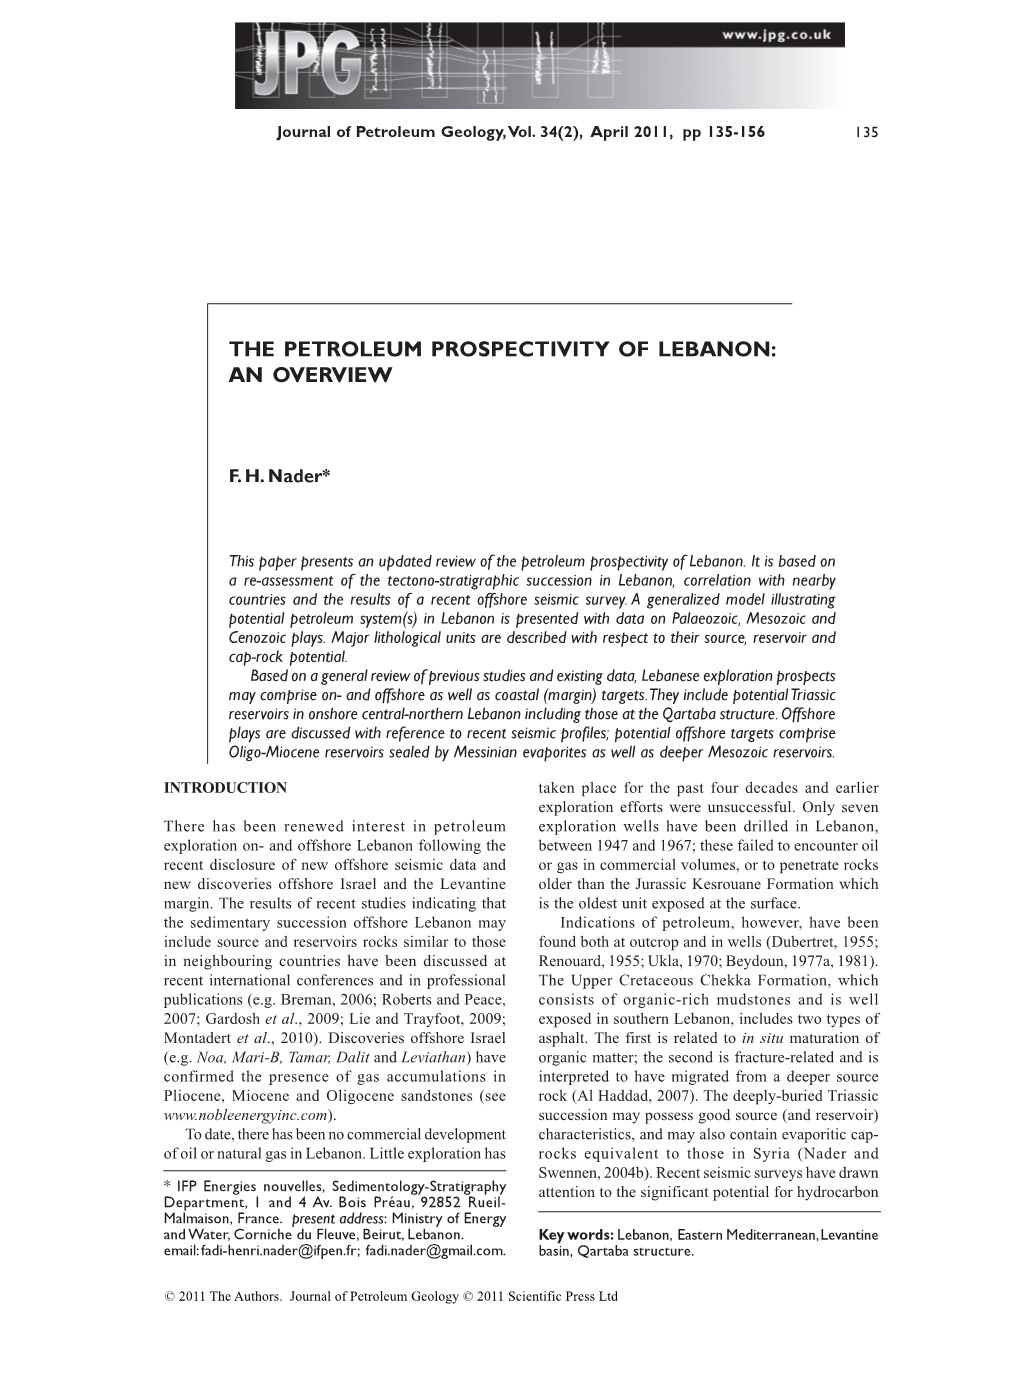 The Petroleum Prospectivity of Lebanon: an Overview